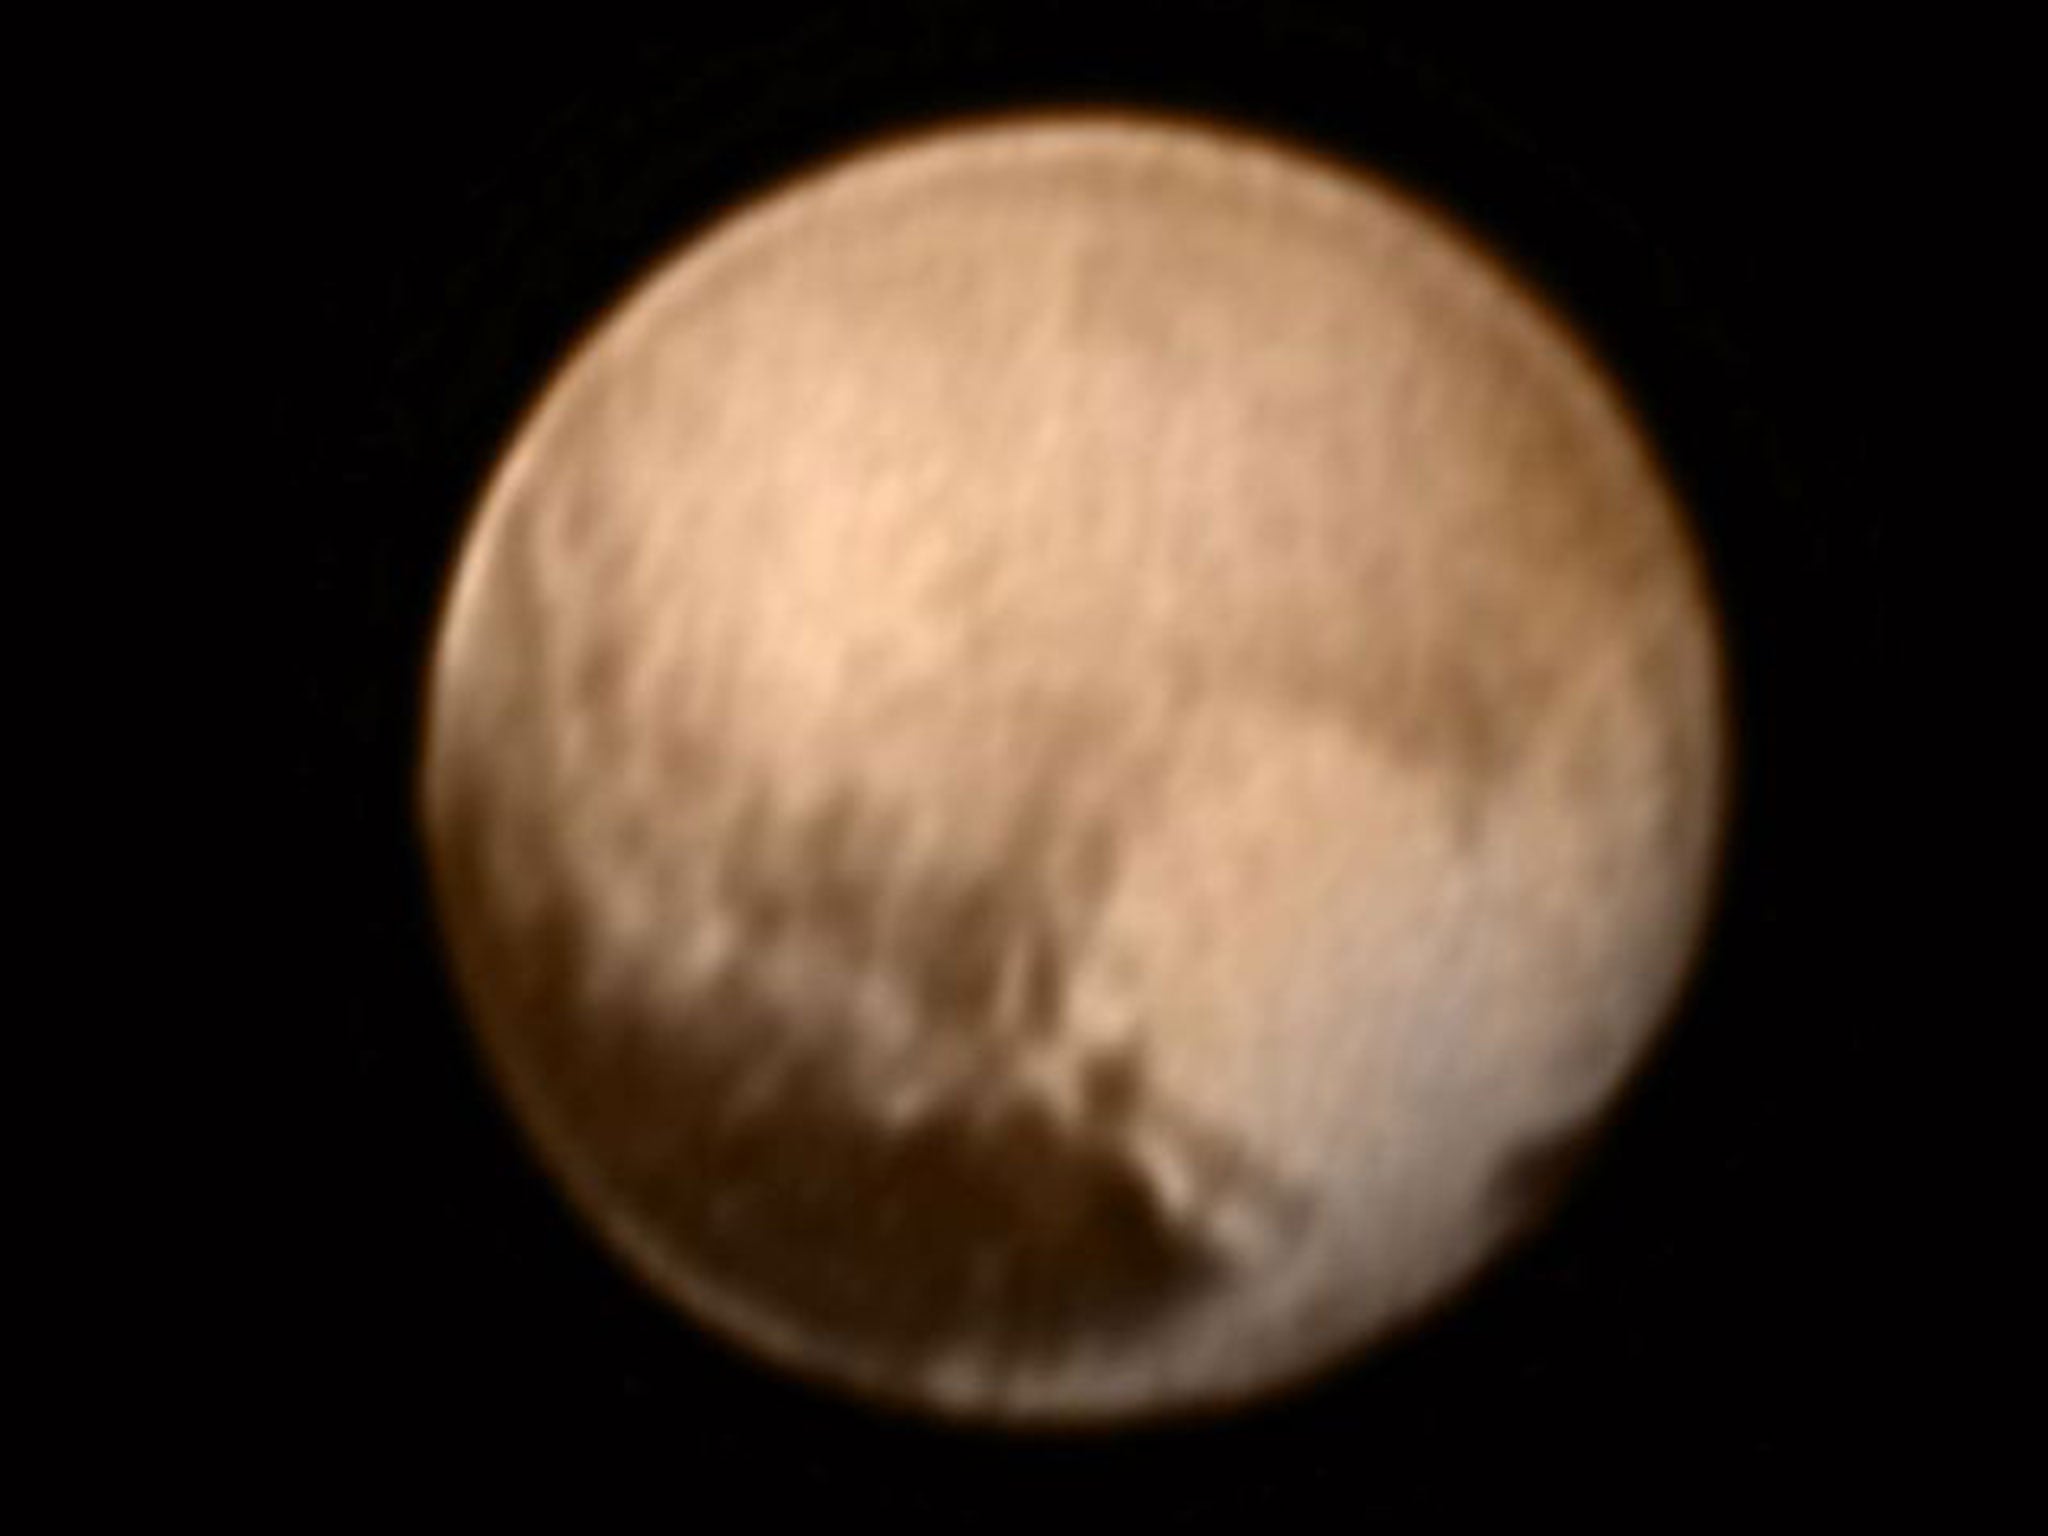 An image of Pluto taken by New Horizons